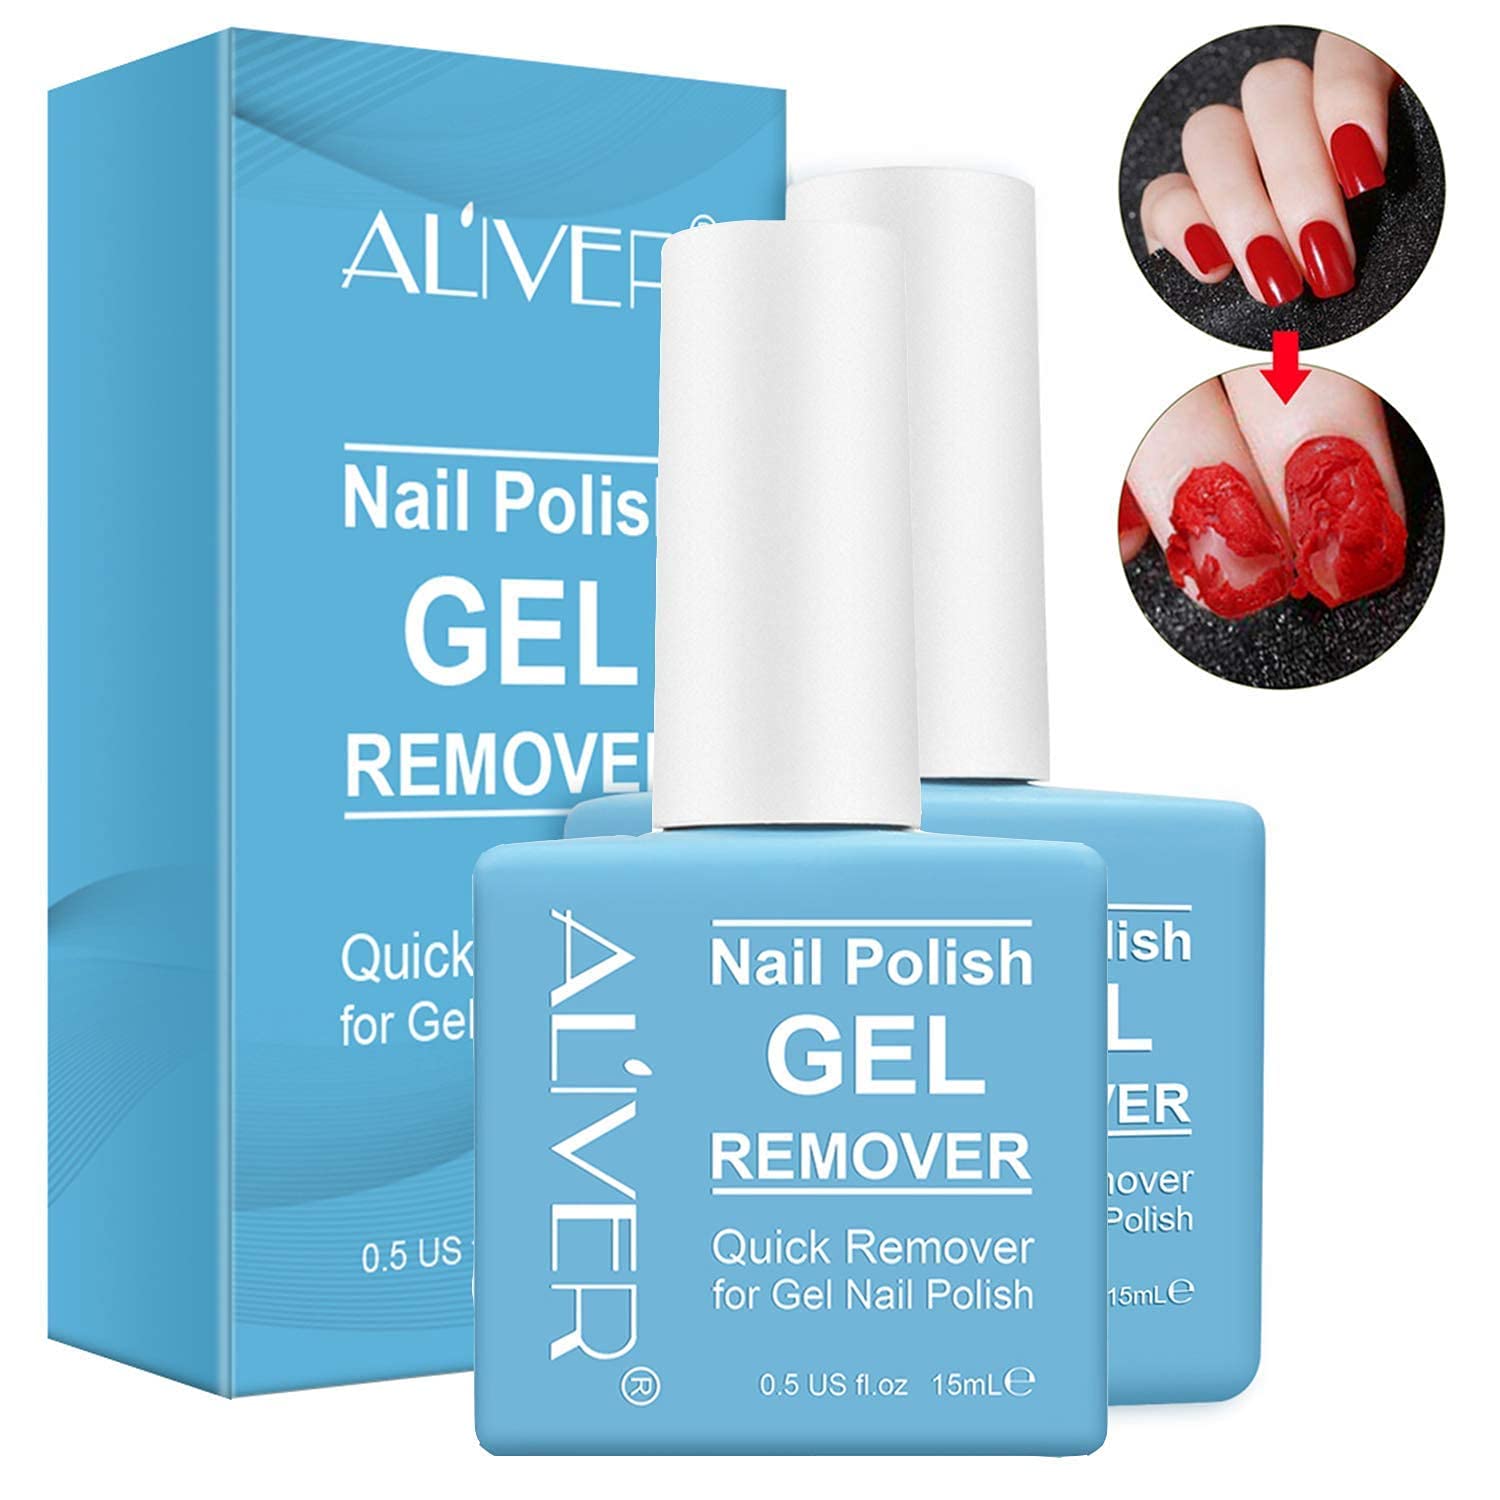 Nail Polish Gel Remover (2 Pack), Gel Polish Remover For Nails In 3-5  Minutes Quick